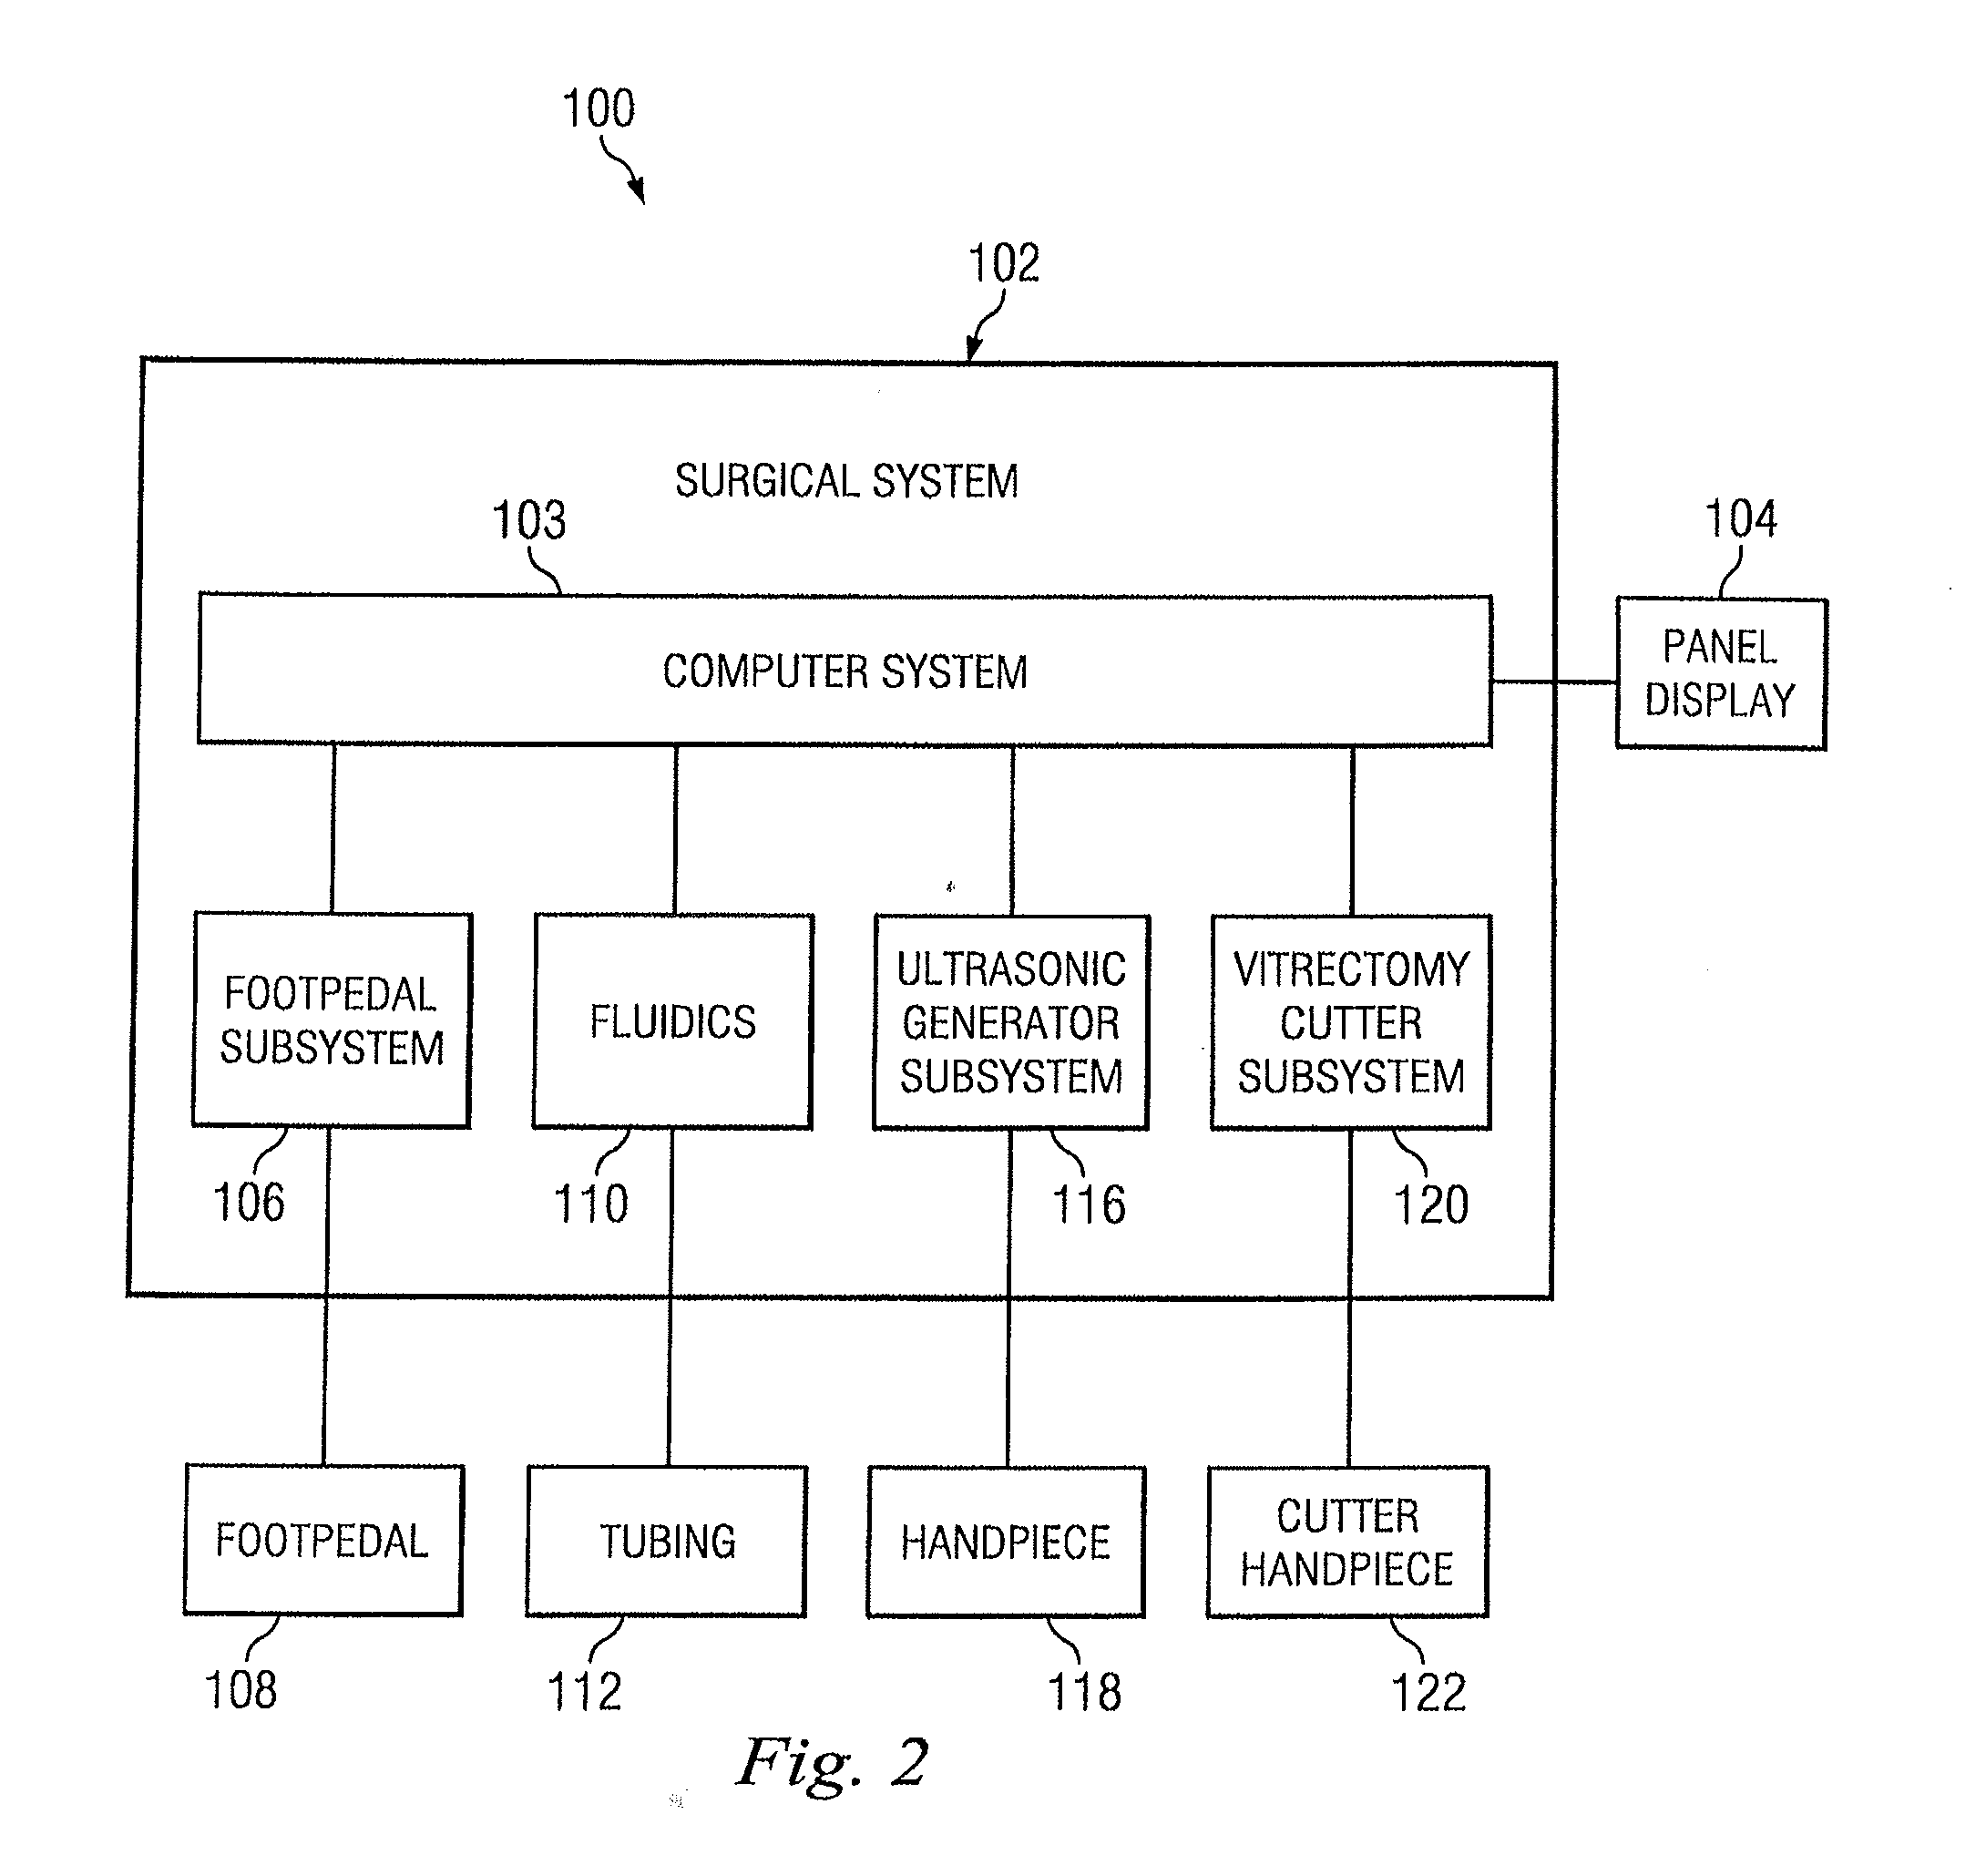 Systems and Methods For Small Bore Aspiration